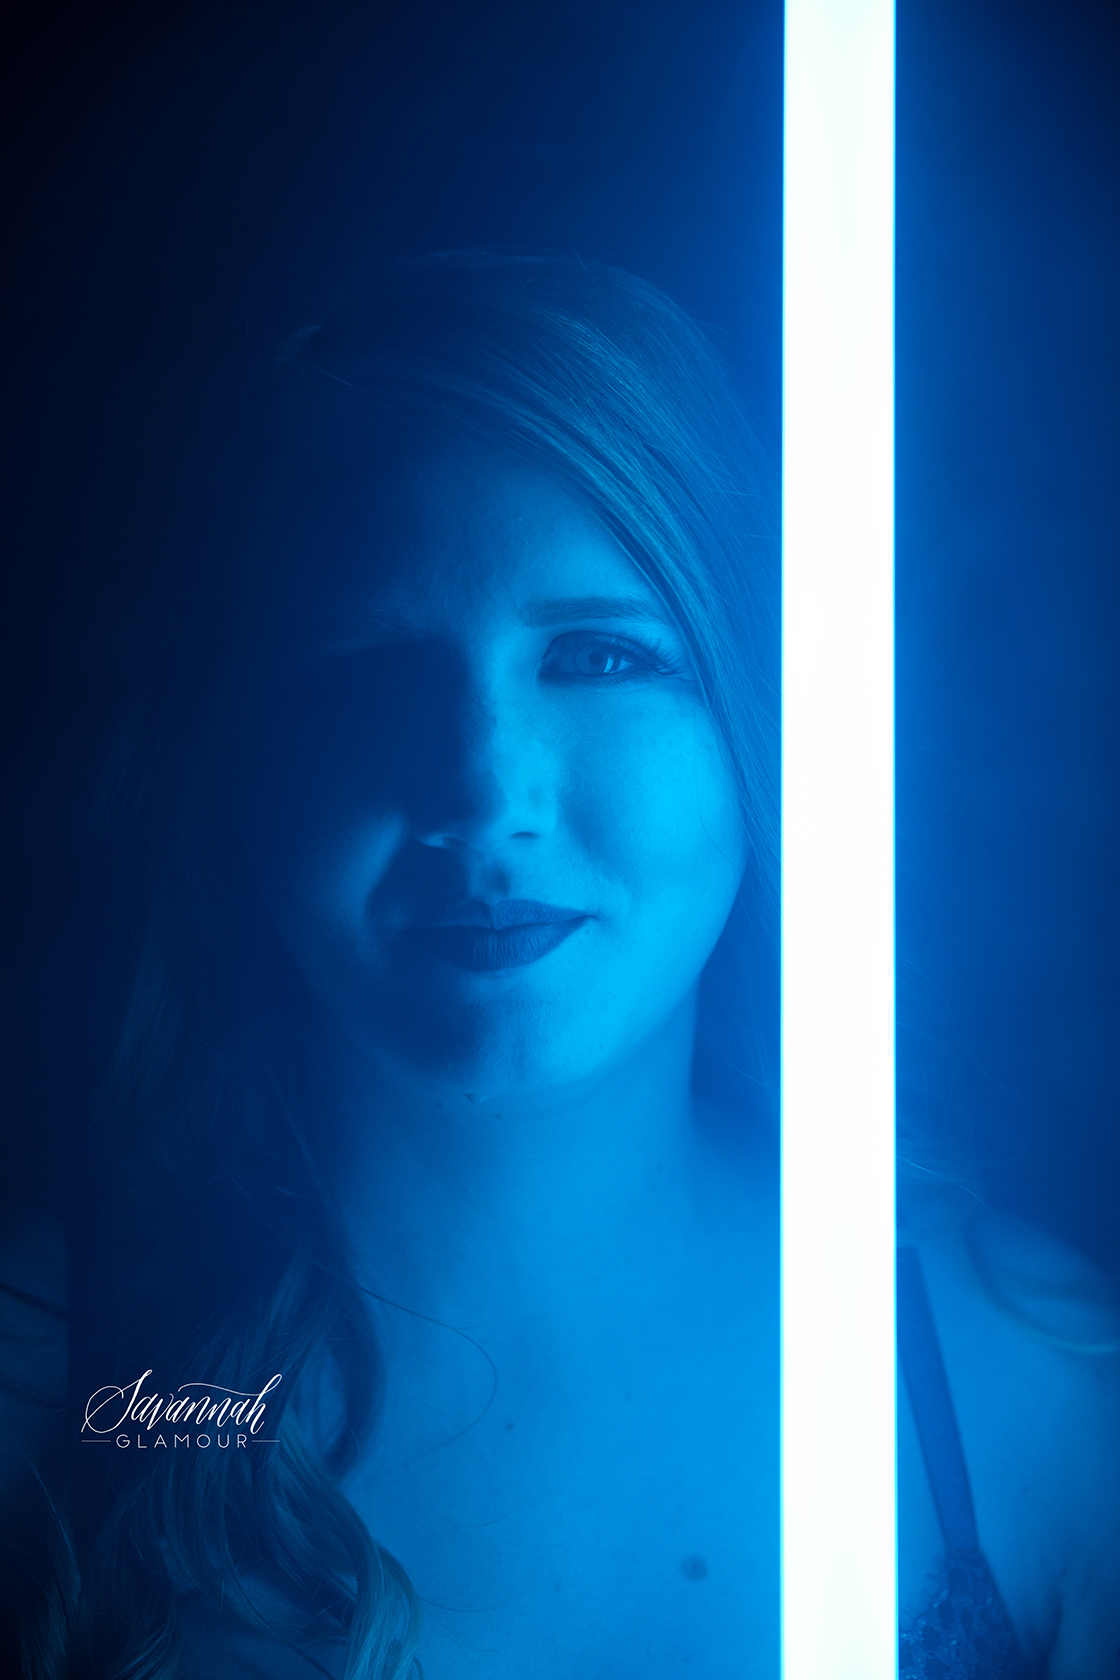 headshot of a woman holding a lightsaber close to her face